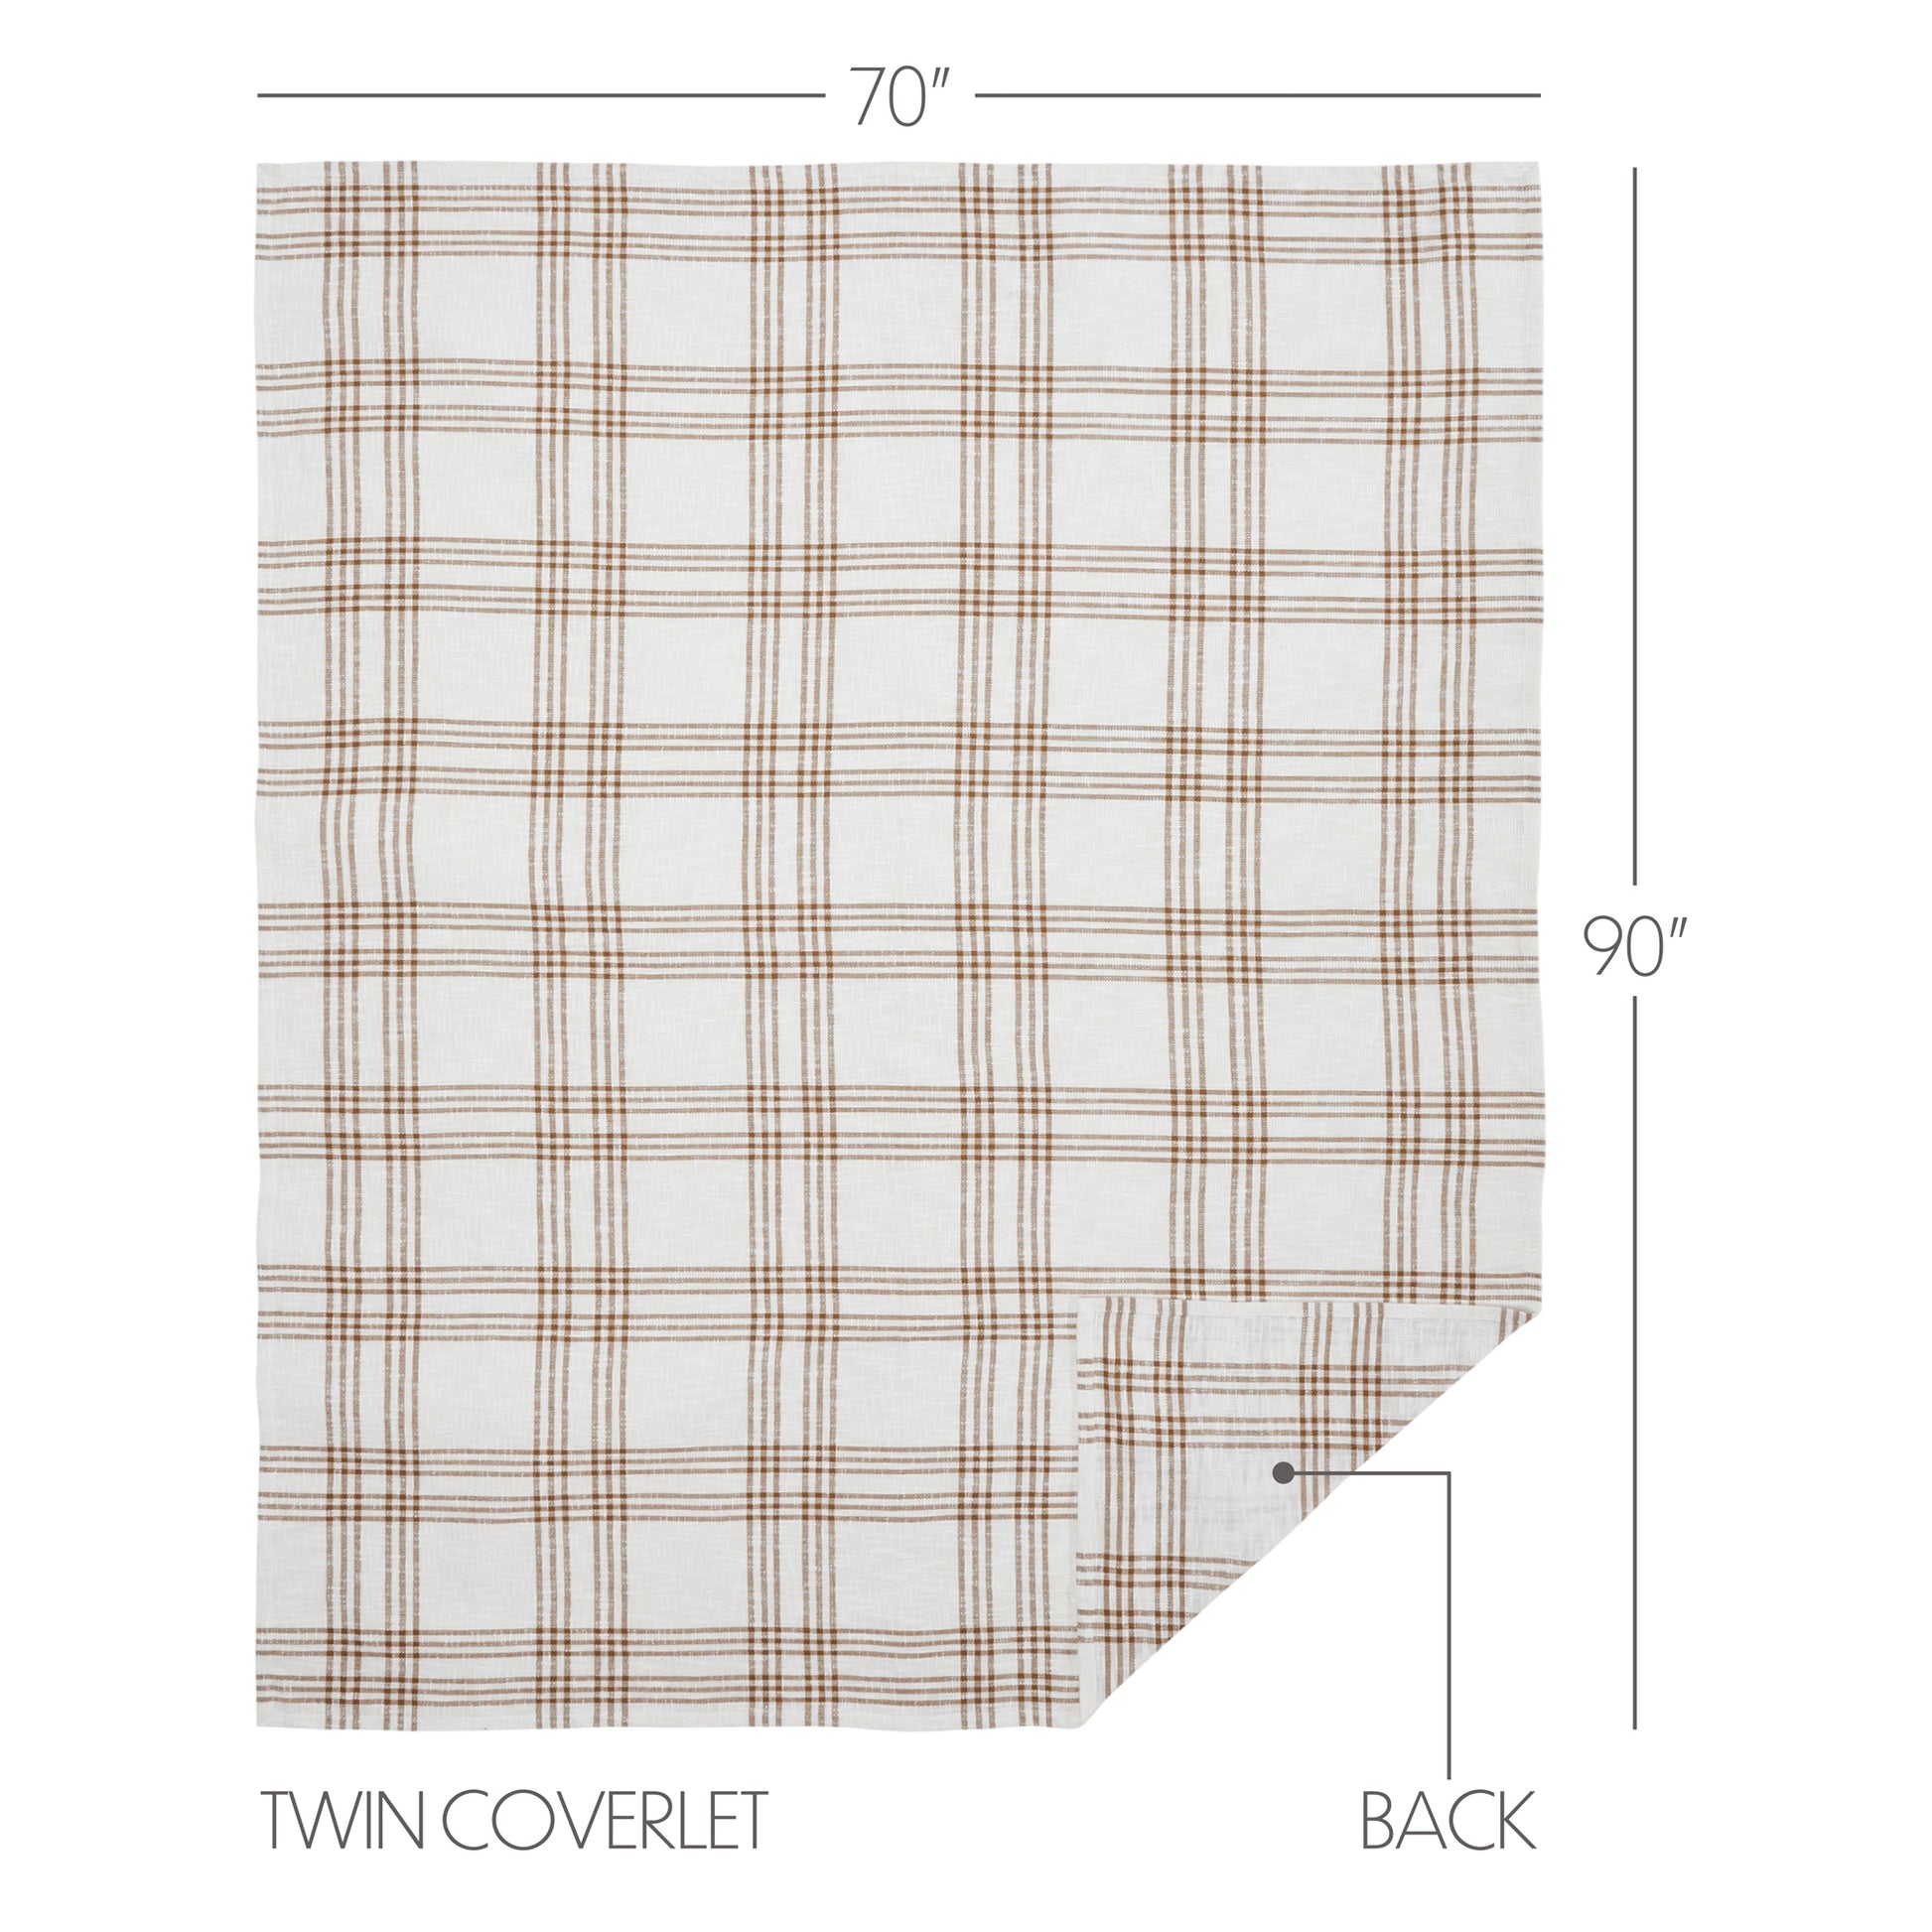 80534-Wheat-Plaid-Twin-Coverlet-70x90-image-1